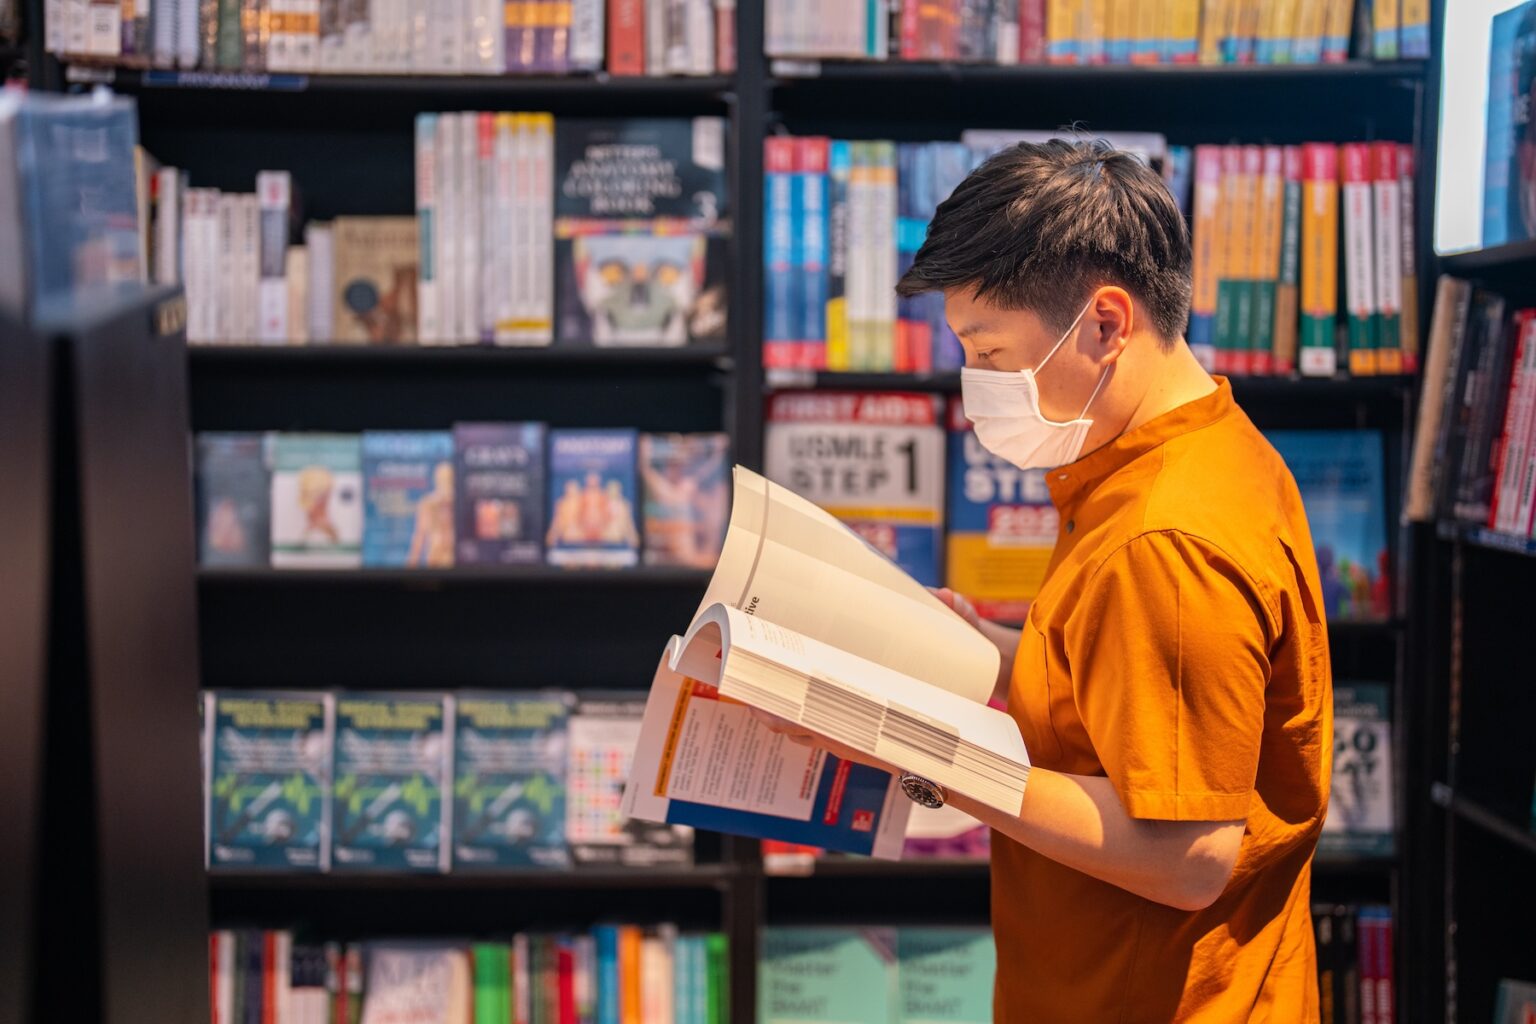 A person stands in the language learning section of a bookstore, studying a book on the Thai language test